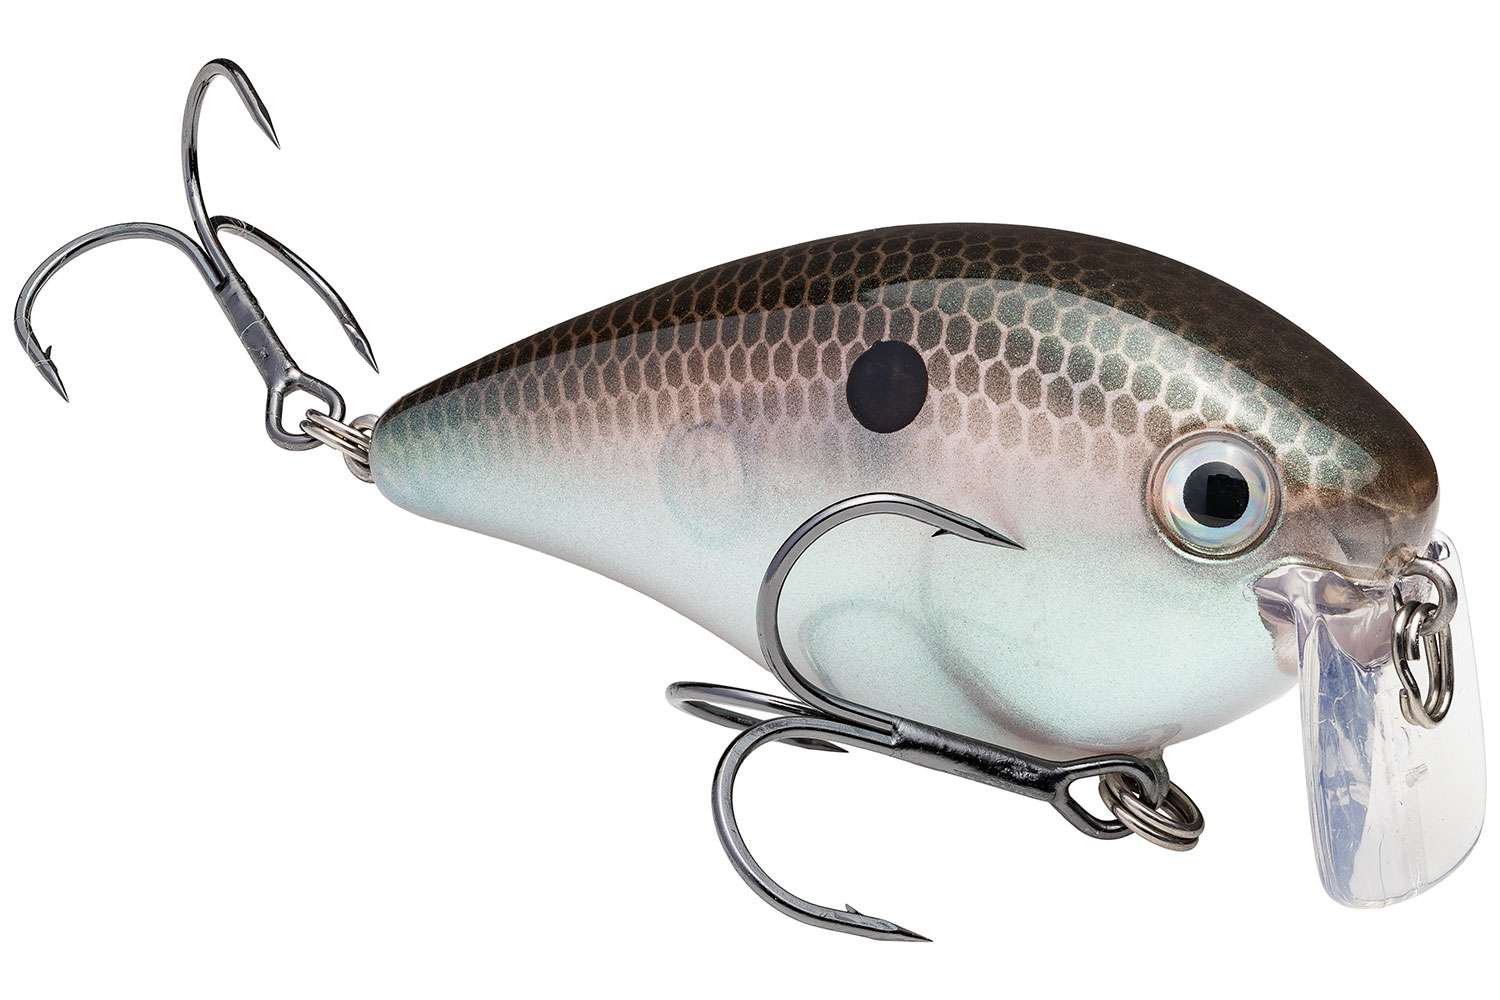 <B>Strike King KVD 2.5 Squarebill</B><BR>
The 2.5 Wake is built off of the very popular KVD 2.5 Squarebill design that anglers love. The difference is the unique bill design that is angled so the bait wakes the surface of the water instead of diving. The 2.5 Wake is designed where it can be reeled both fast and slow speeds and will not blow out â an issue that is common in other wake bait designs. Being able to reel it fast allows the fish to not get a good look at the bait, enticing more strikes. Additionally, internal rattles create a unique clacking sound that drives fish crazy. Available in 12 colors. 
<BR>
<B>MSRP: $6.99</B>